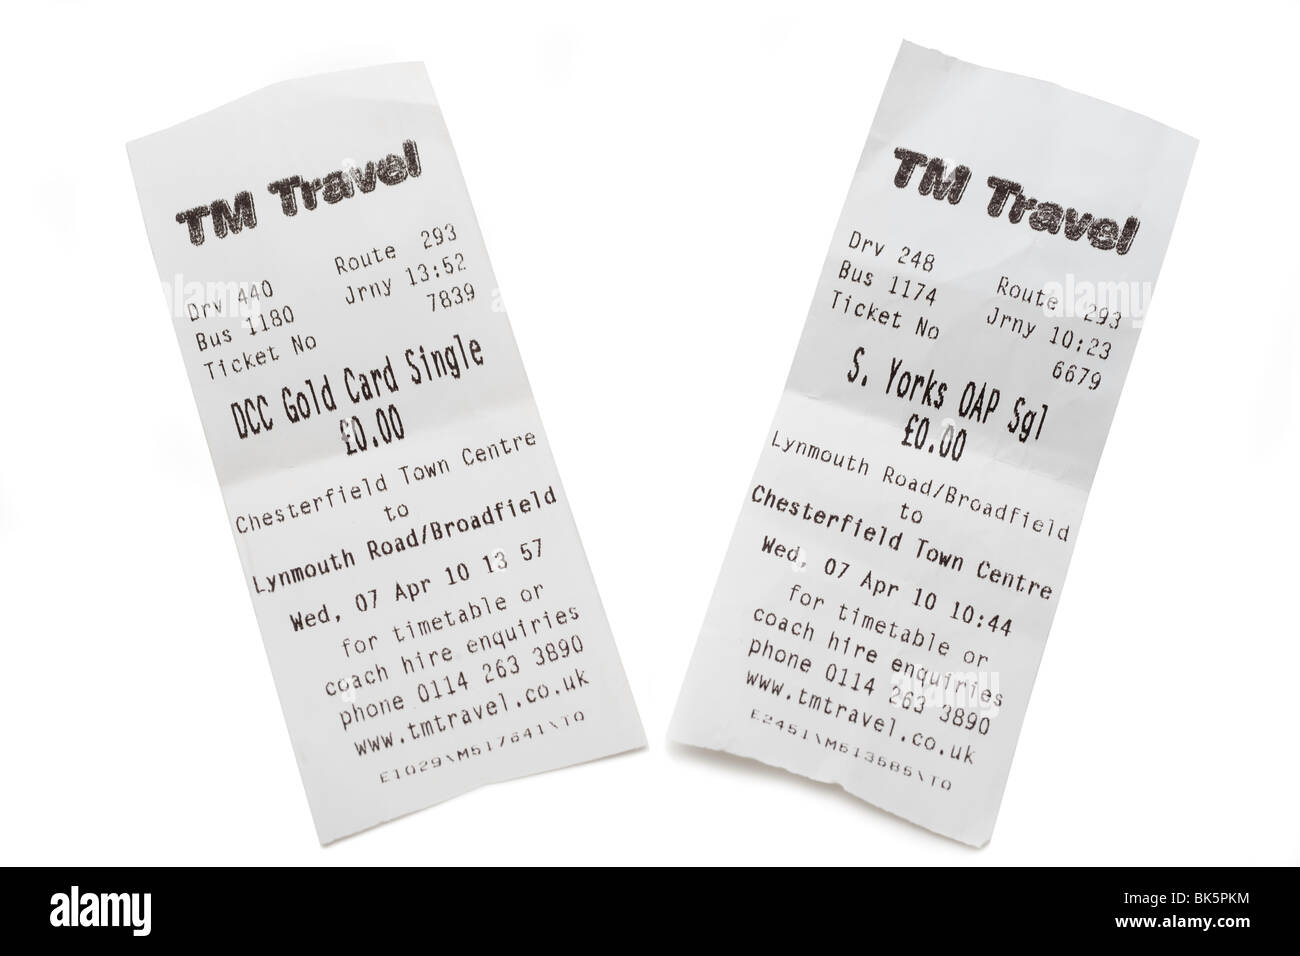 Two Tm Travel bus tickets outward and return journeys Stock Photo